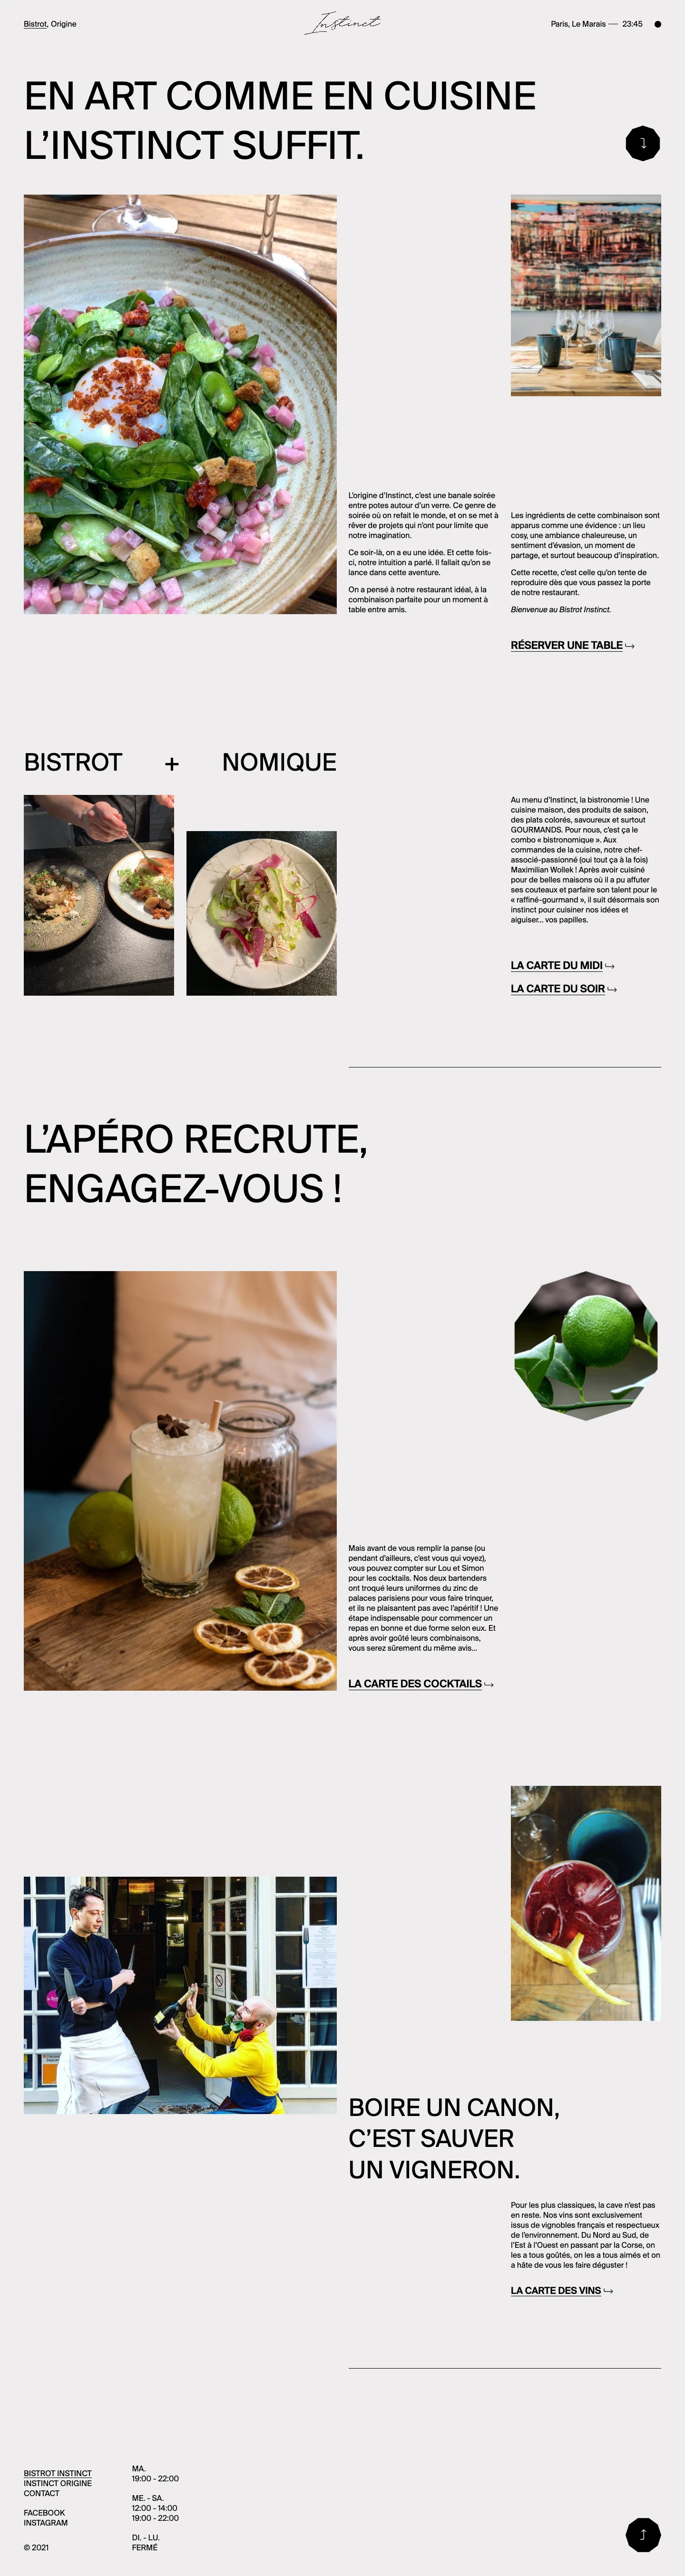 Instinct Origine Landing Page Example: Home cooking, seasonal products, colorful, tasty and above all gourmet dishes!